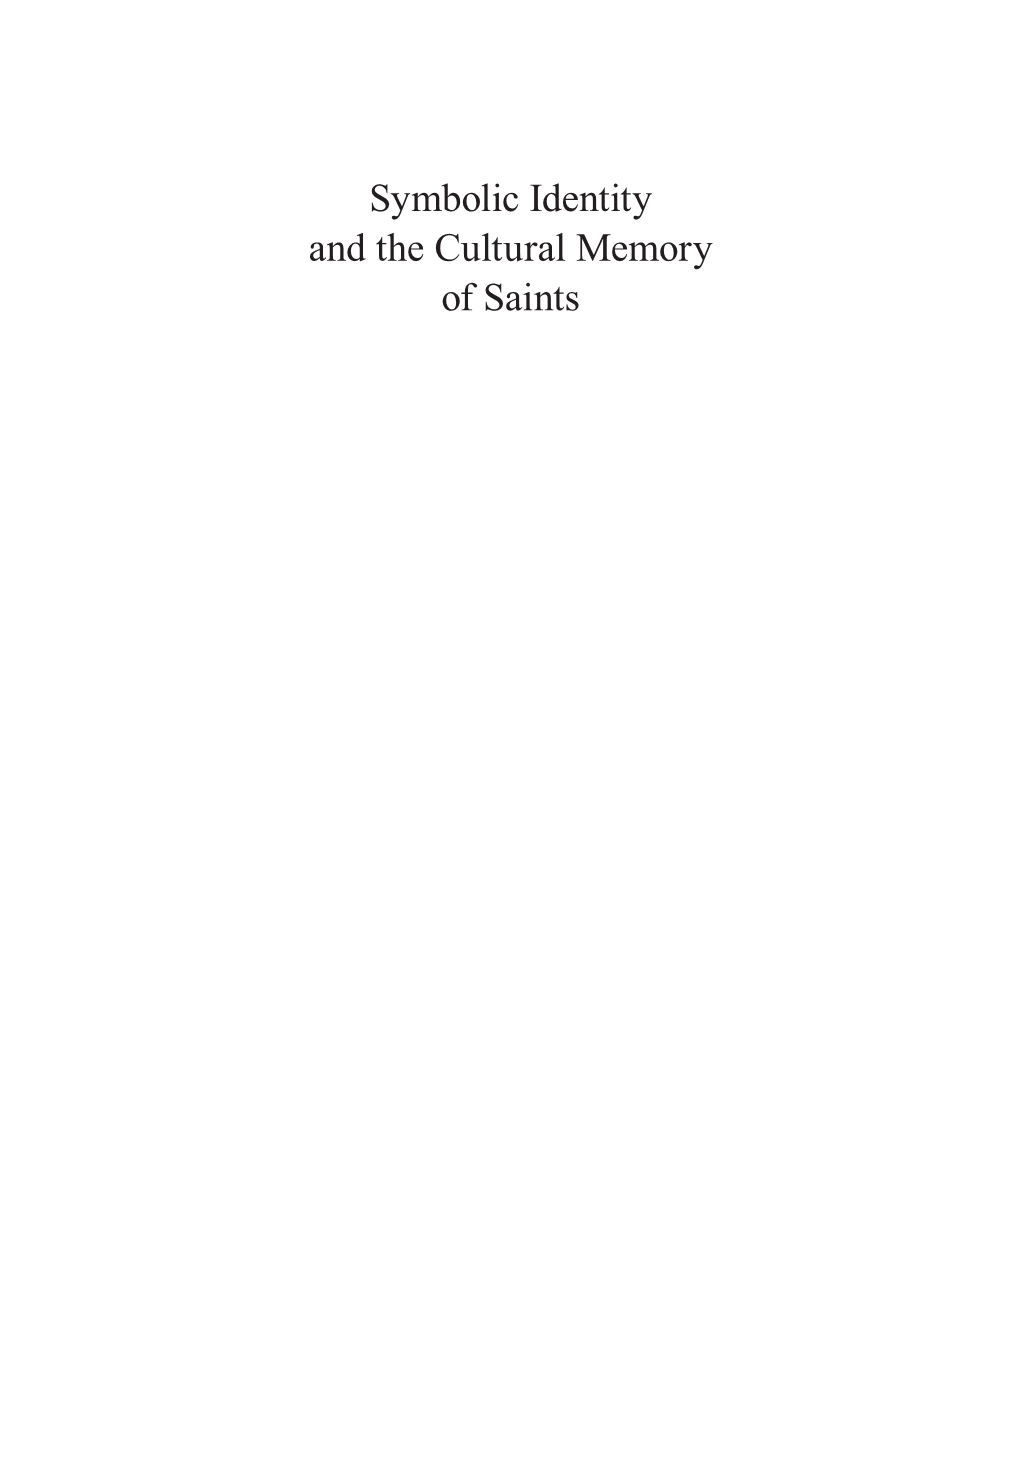 Symbolic Identity and the Cultural Memory of Saints